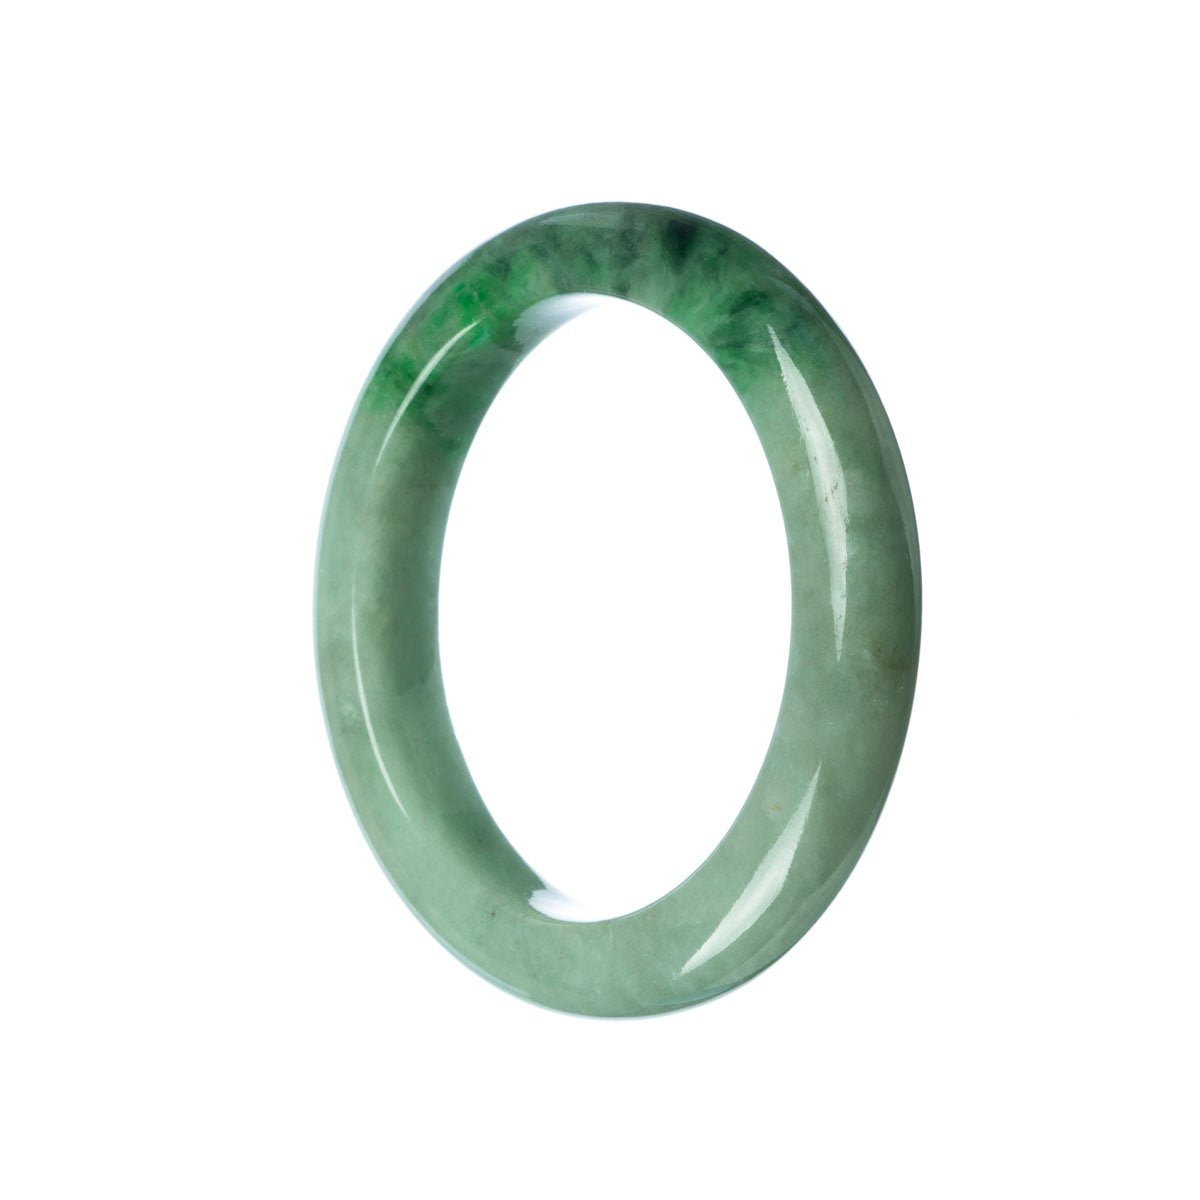 A close-up photograph of a green jade bracelet. The bracelet is made of authentic Type A green jade and has a semi-round shape. It measures 55mm in size. The smooth surface of the bracelet reflects light, showcasing the natural beauty of the jade stone. The bracelet is finely crafted and exudes an air of elegance and sophistication.